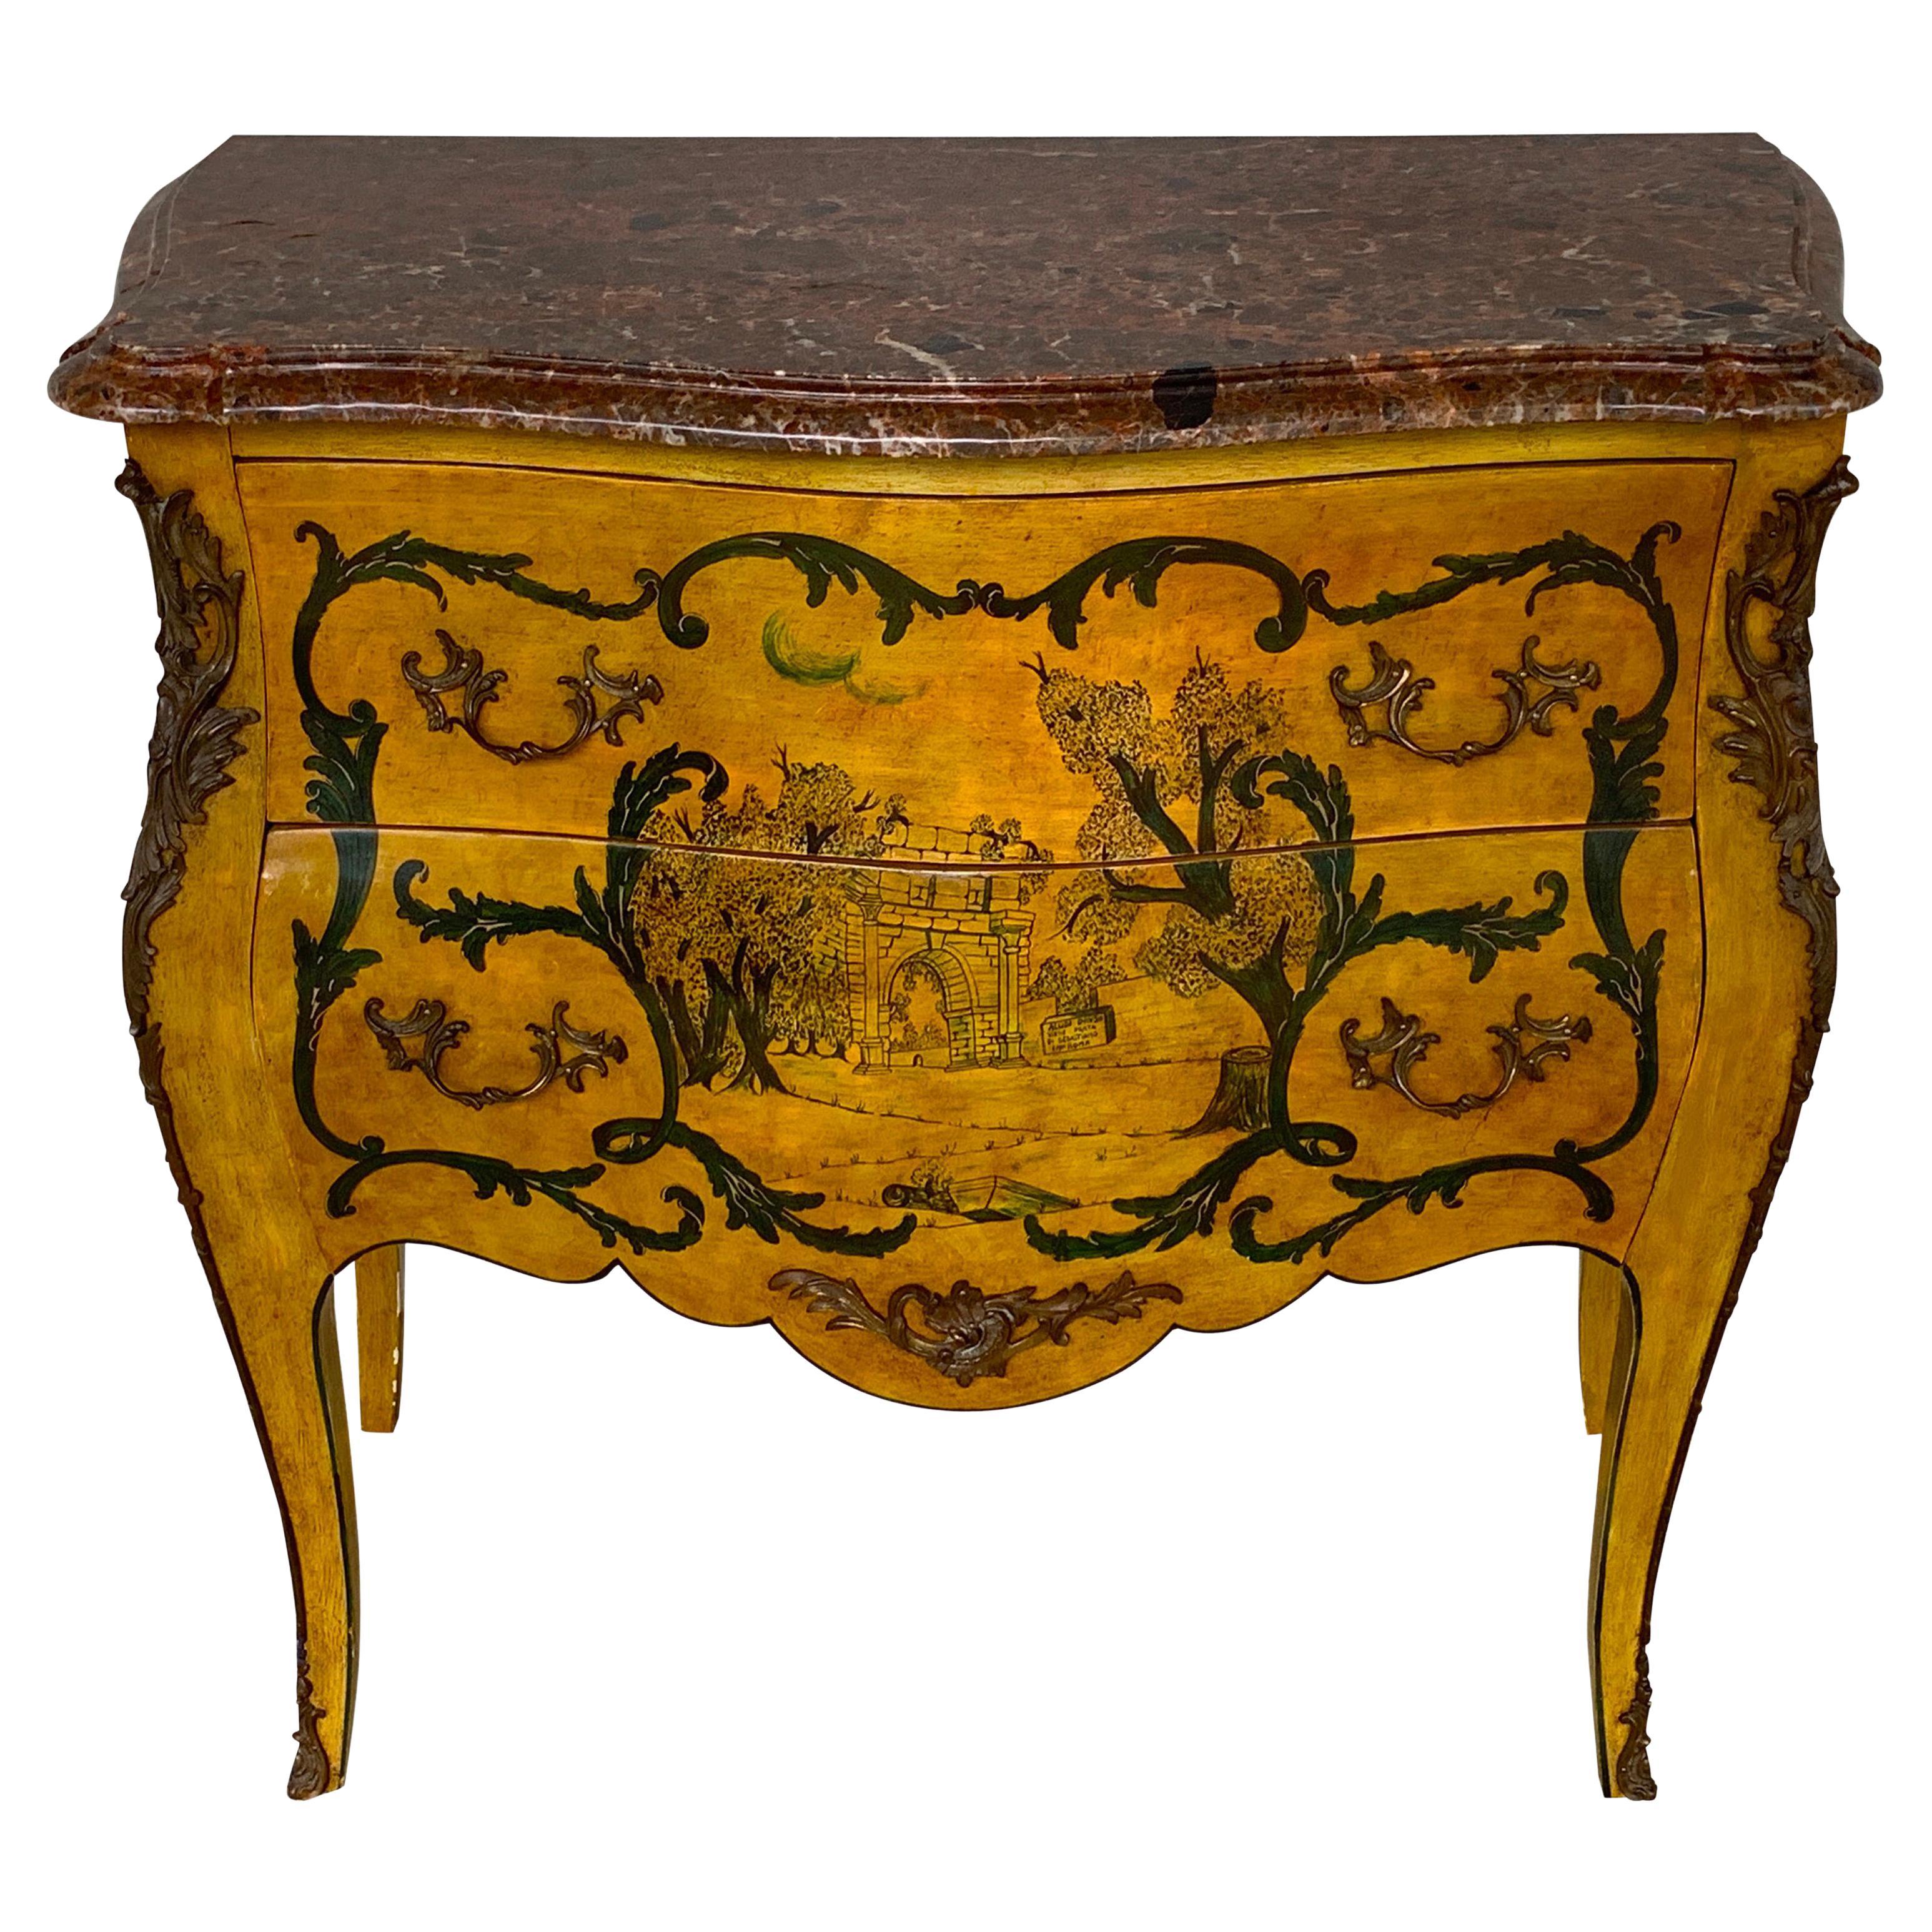 Fine Italian Piranesi Topographical Polychromed Marble Top Commode